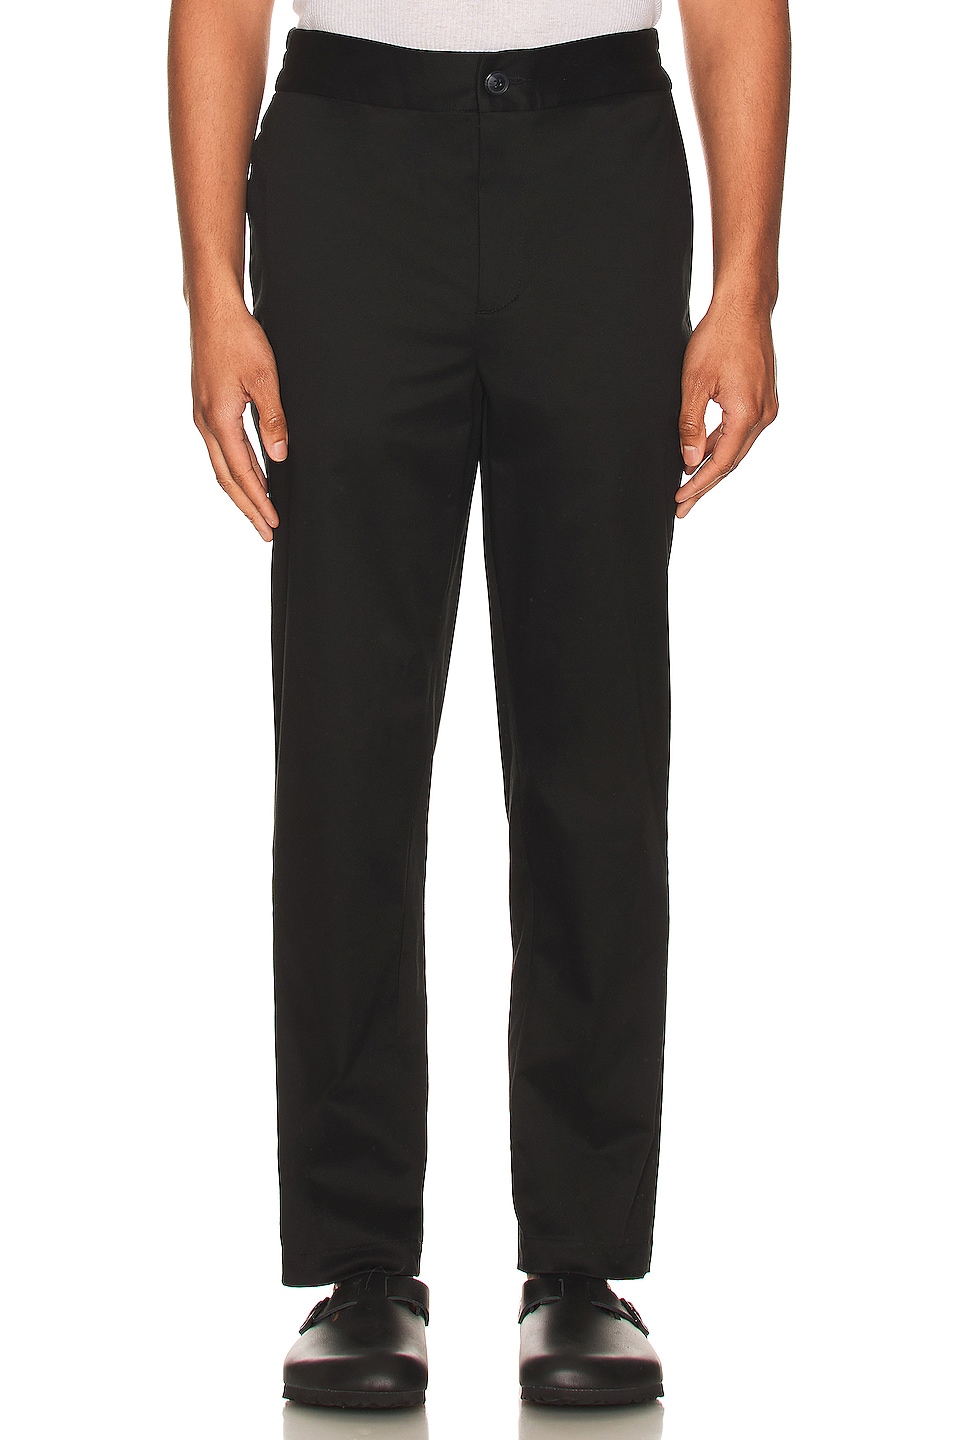 The Chino Pant in Black